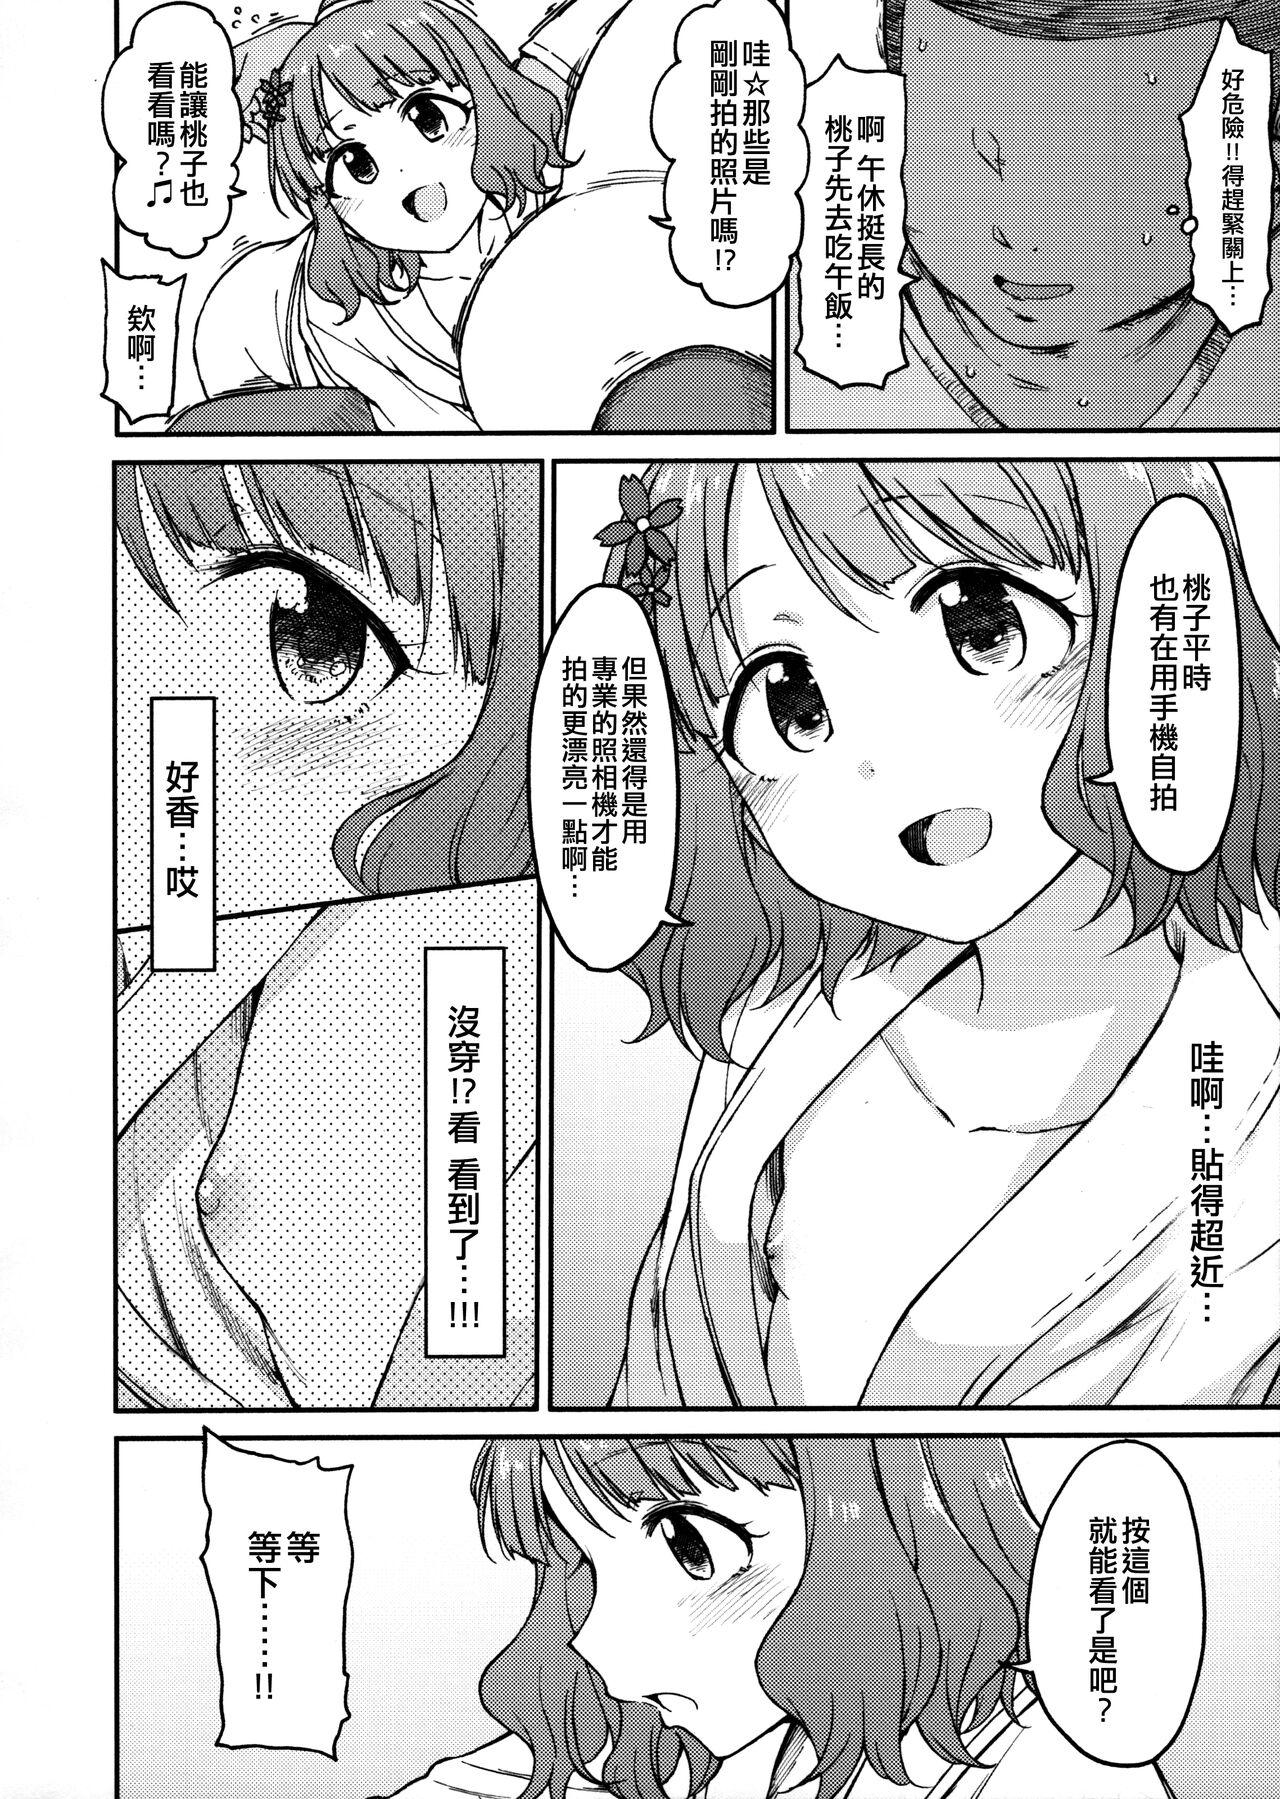 Delicia Candy Wrapper - The idolmaster Old Man - Page 11